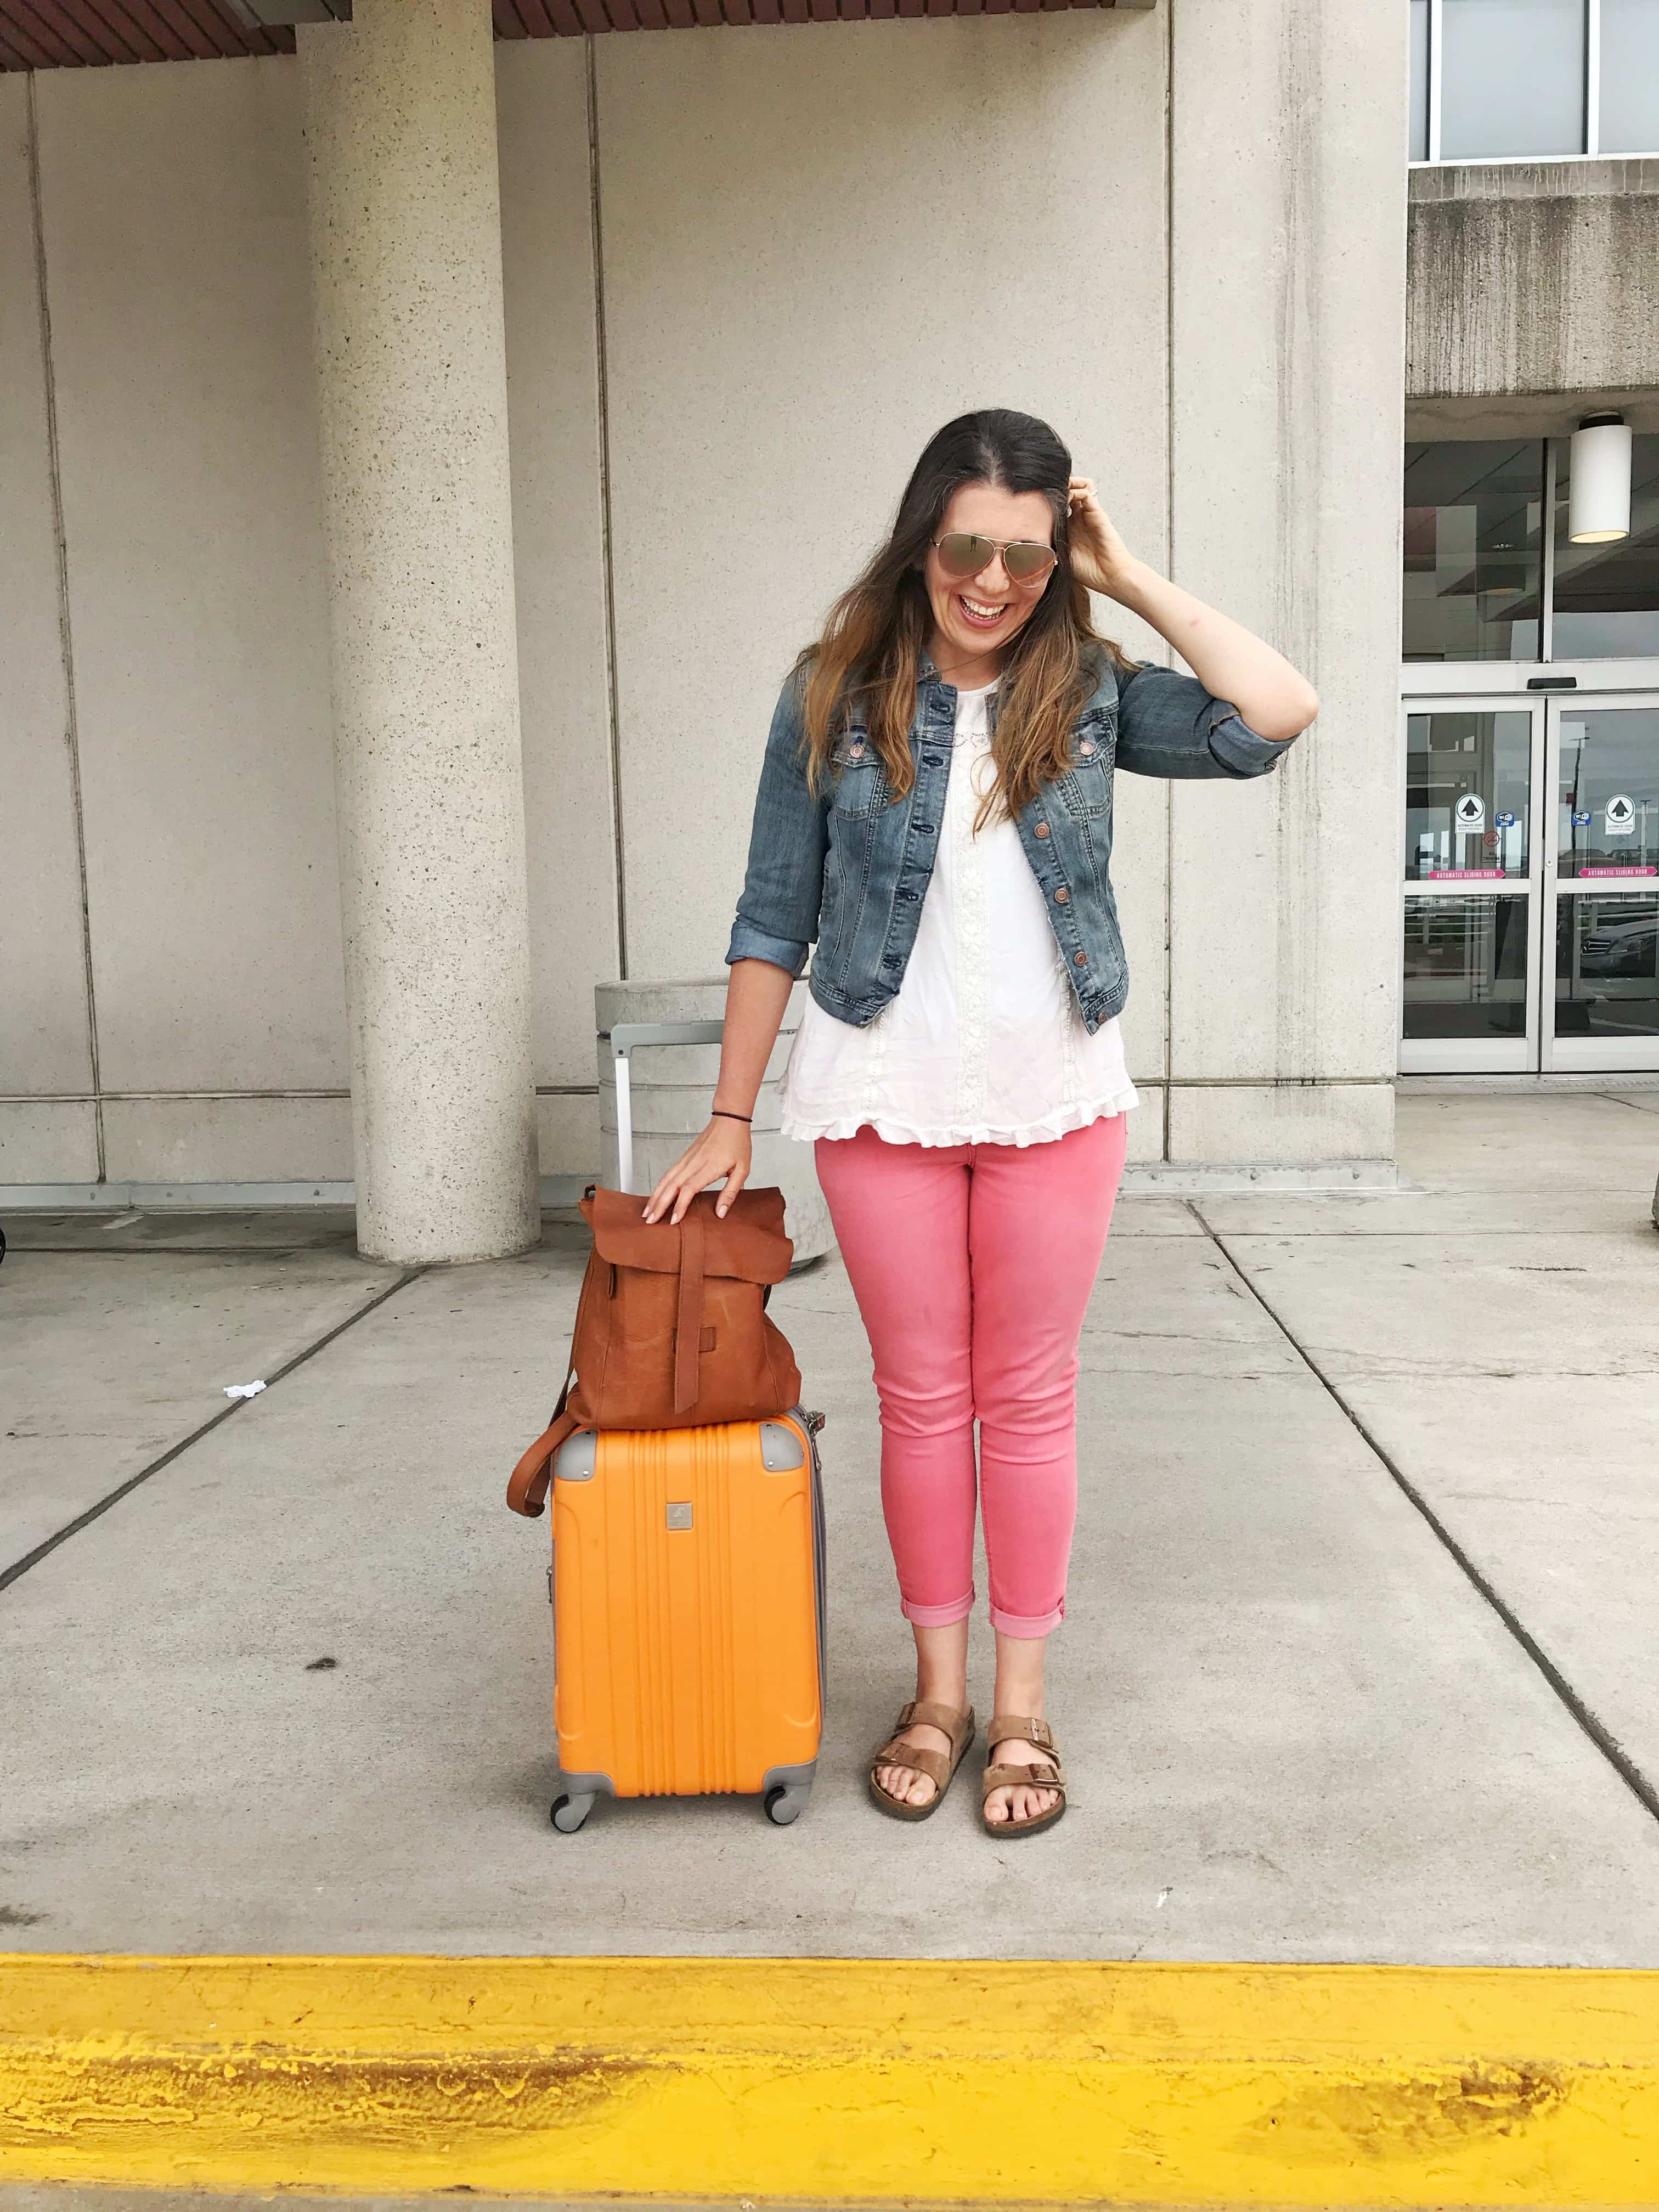 Woman in a denim jacket and pink pants standing next to a rolling suitcase and carry-on bag